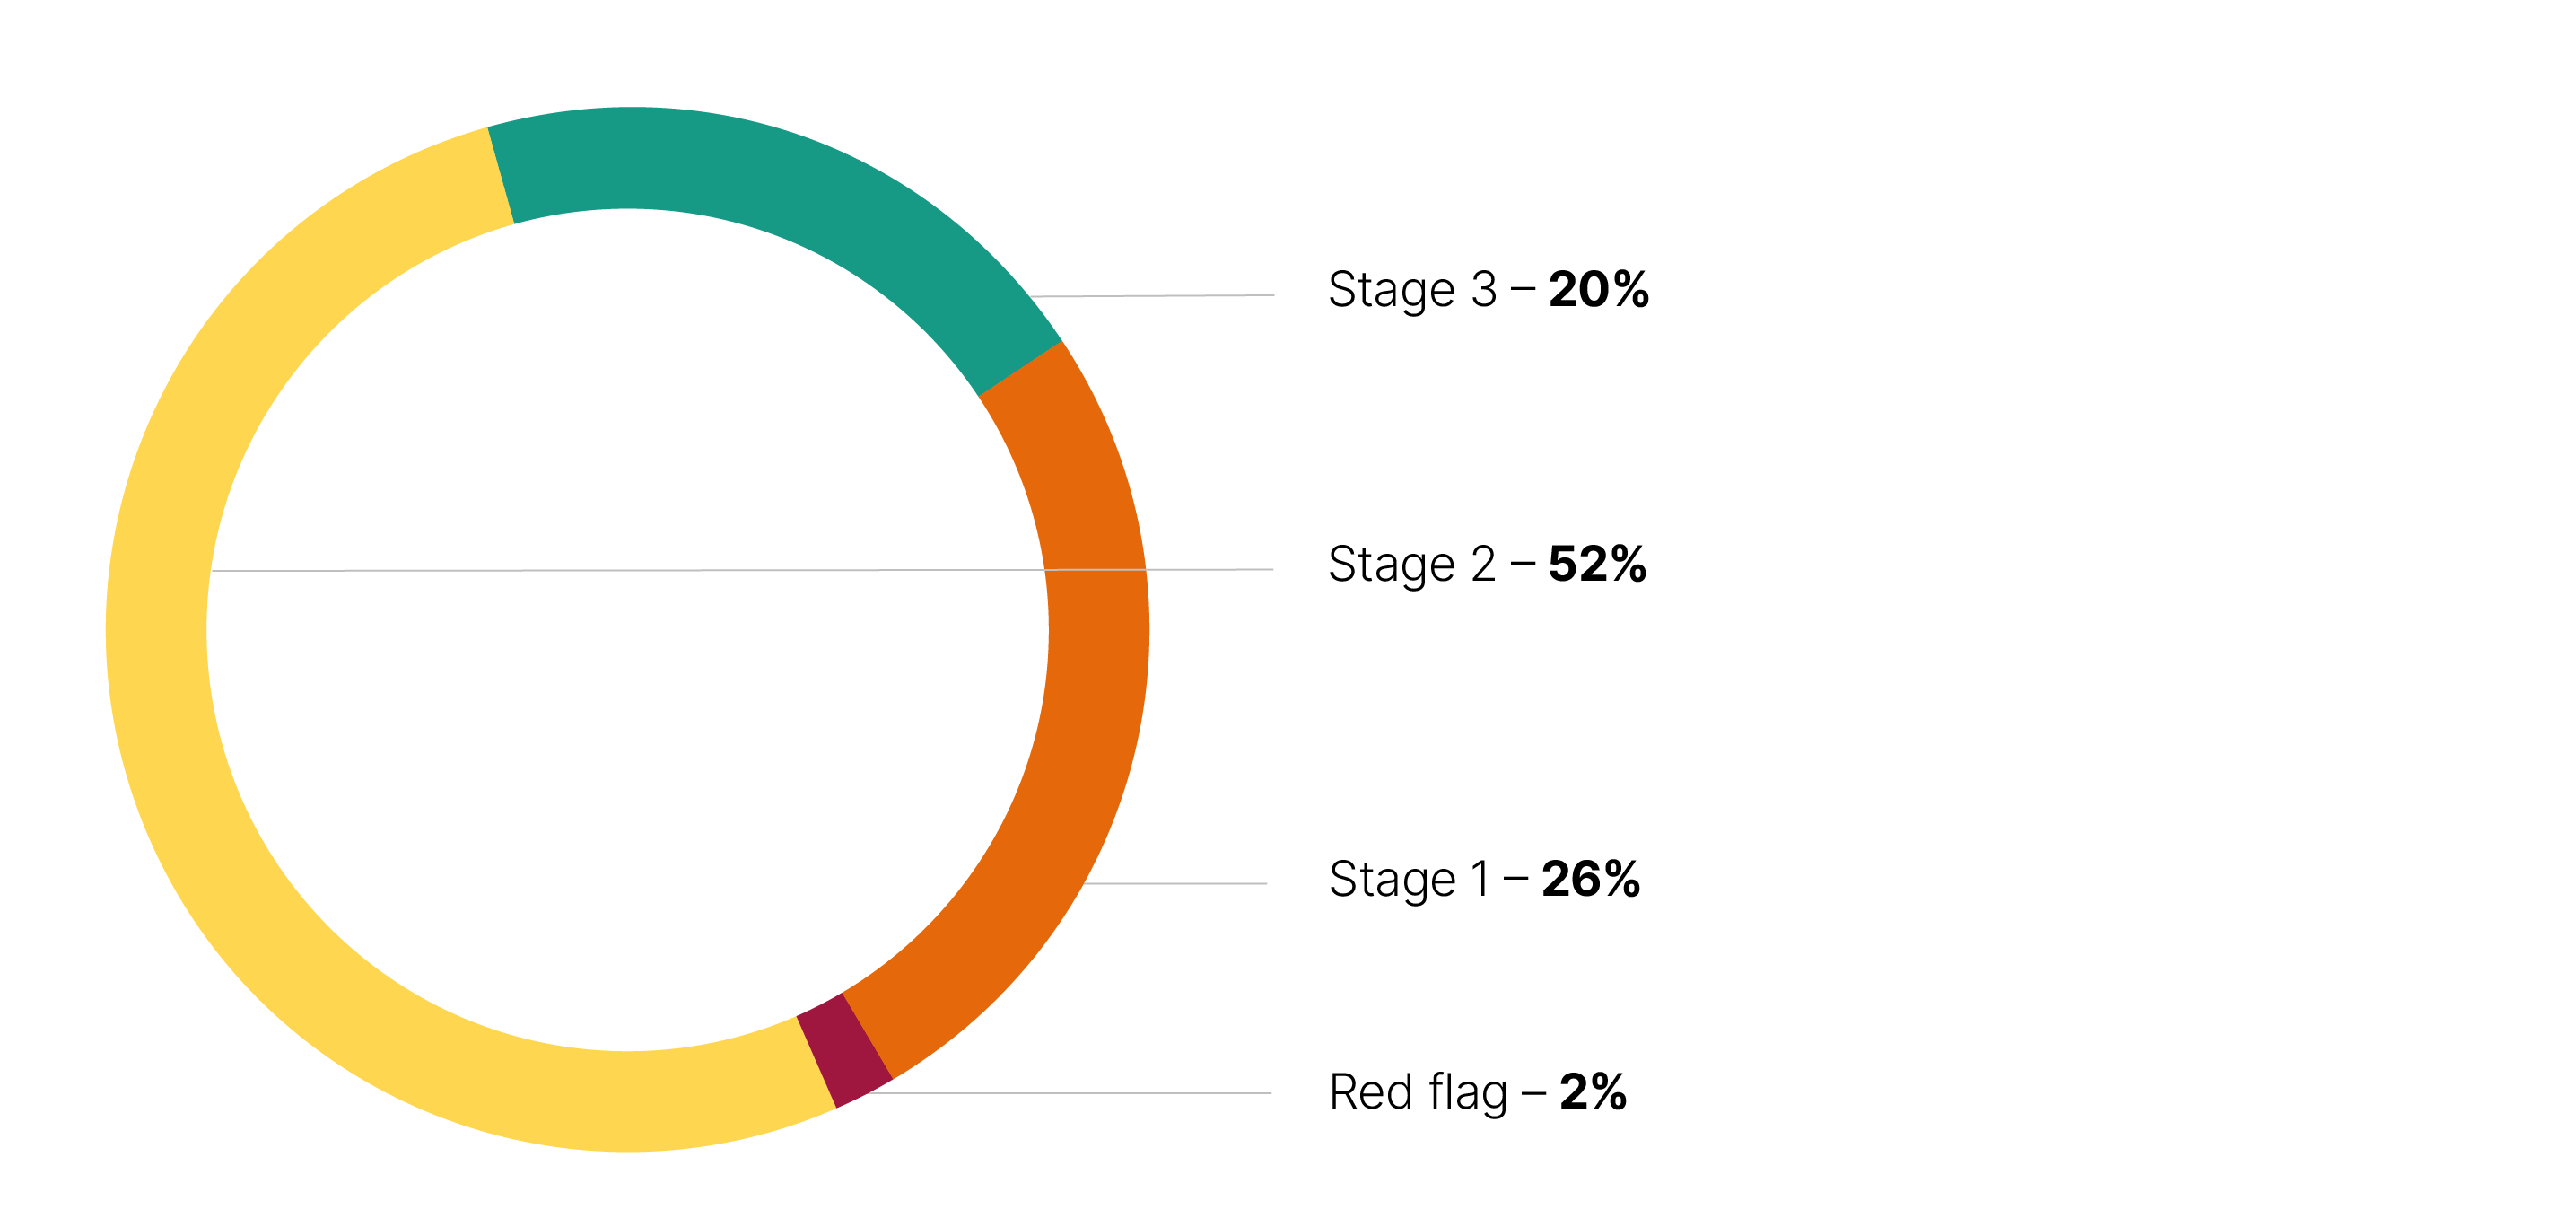 Pie chart showing percentage ratings, 20% Stage 3, 52% stage 2, 26% stage 1, 2% red flag.